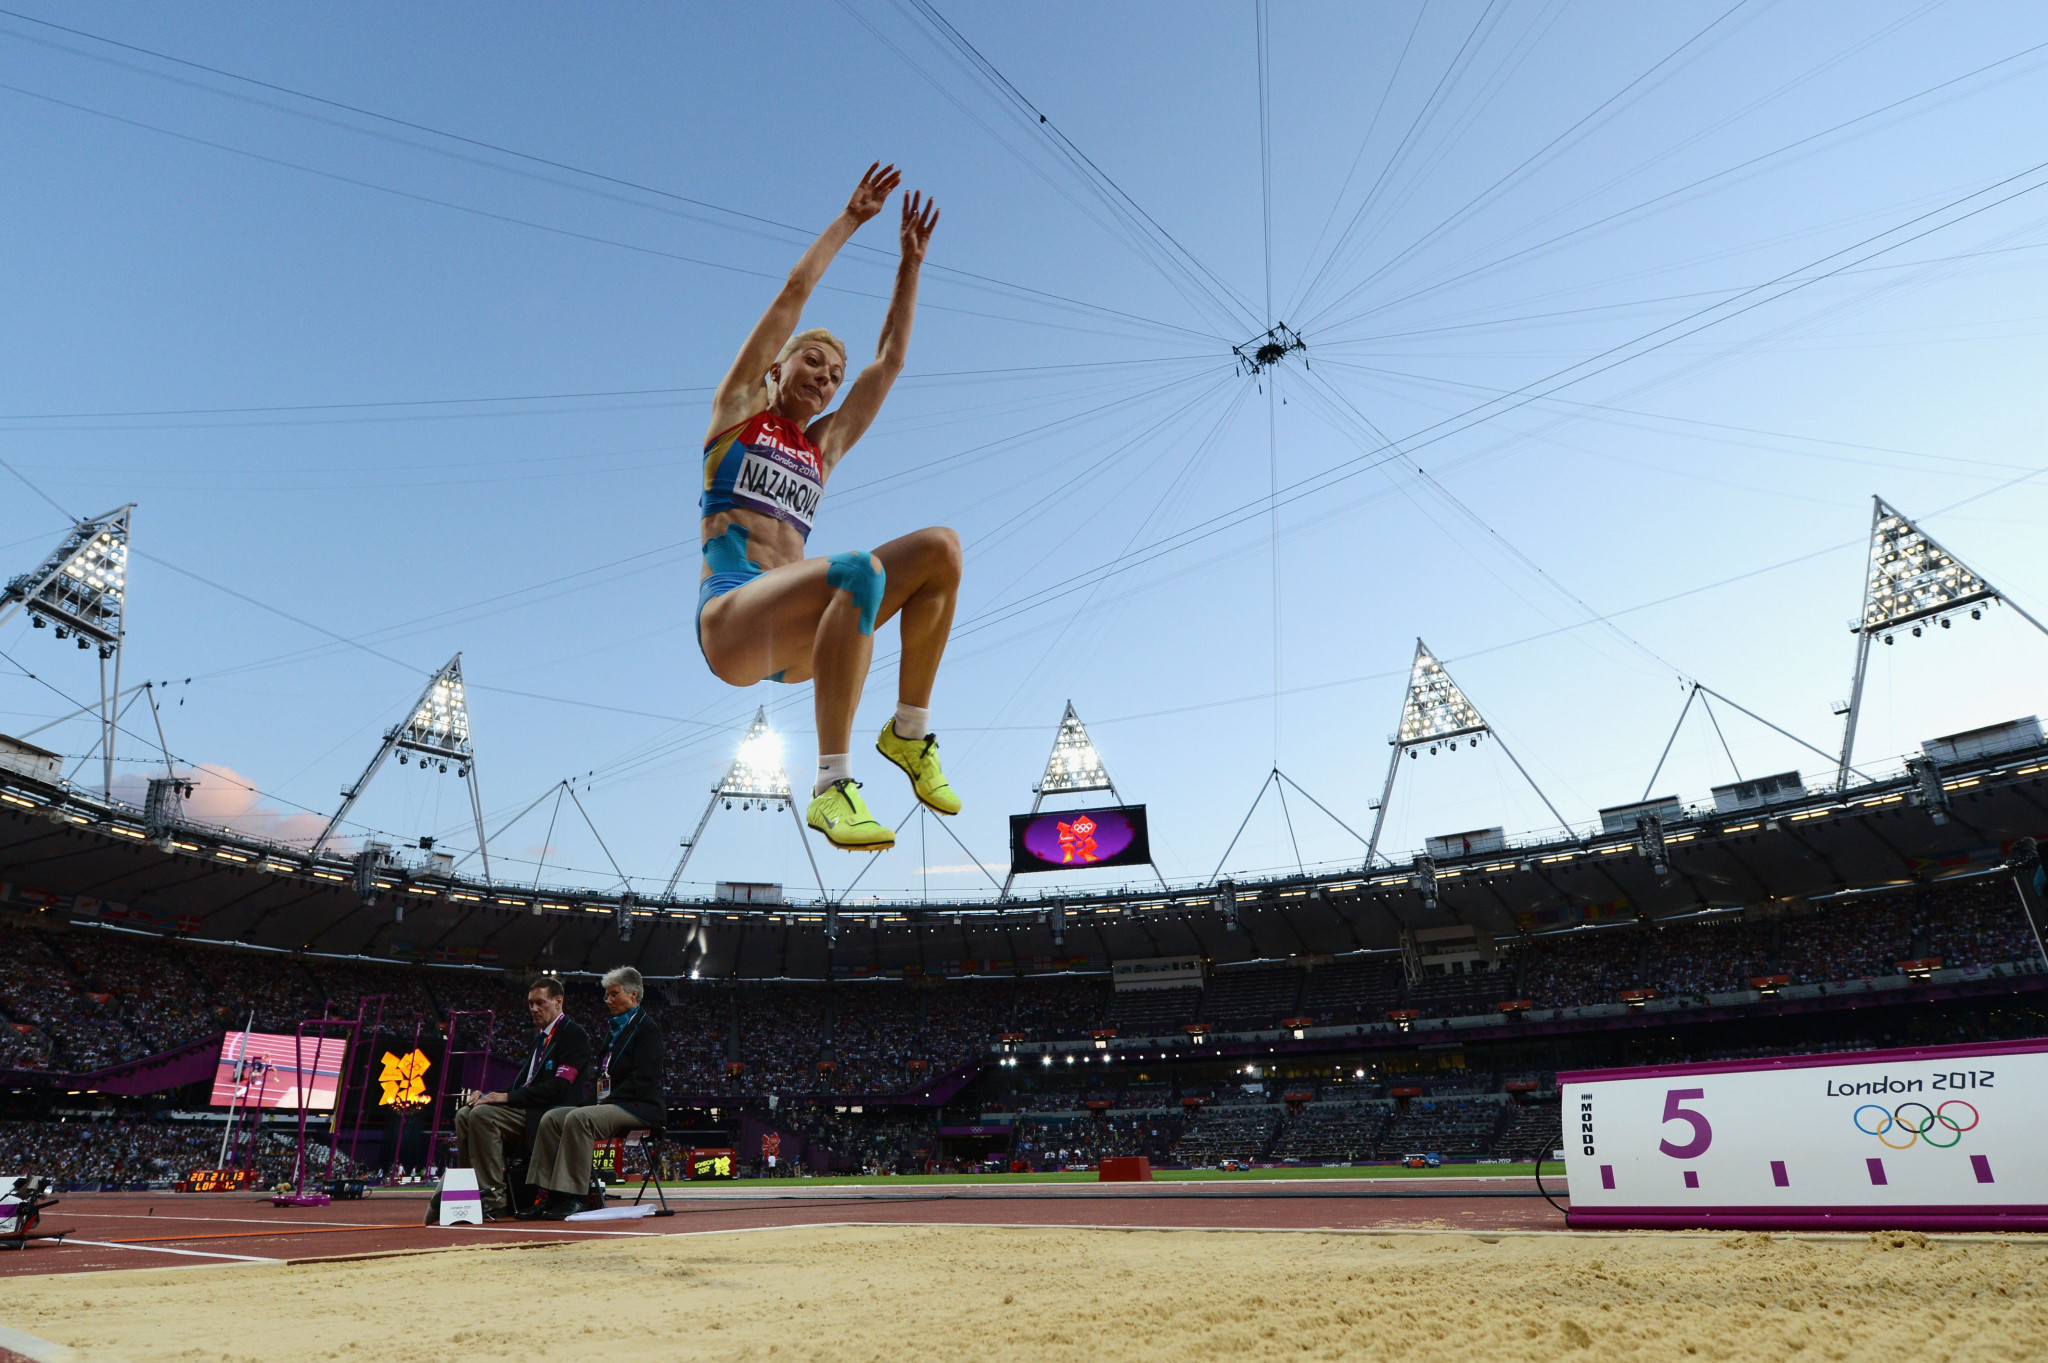 Long jumper Anna Nazarova has been disqualified from London 2012 by the IOC ©Getty Images